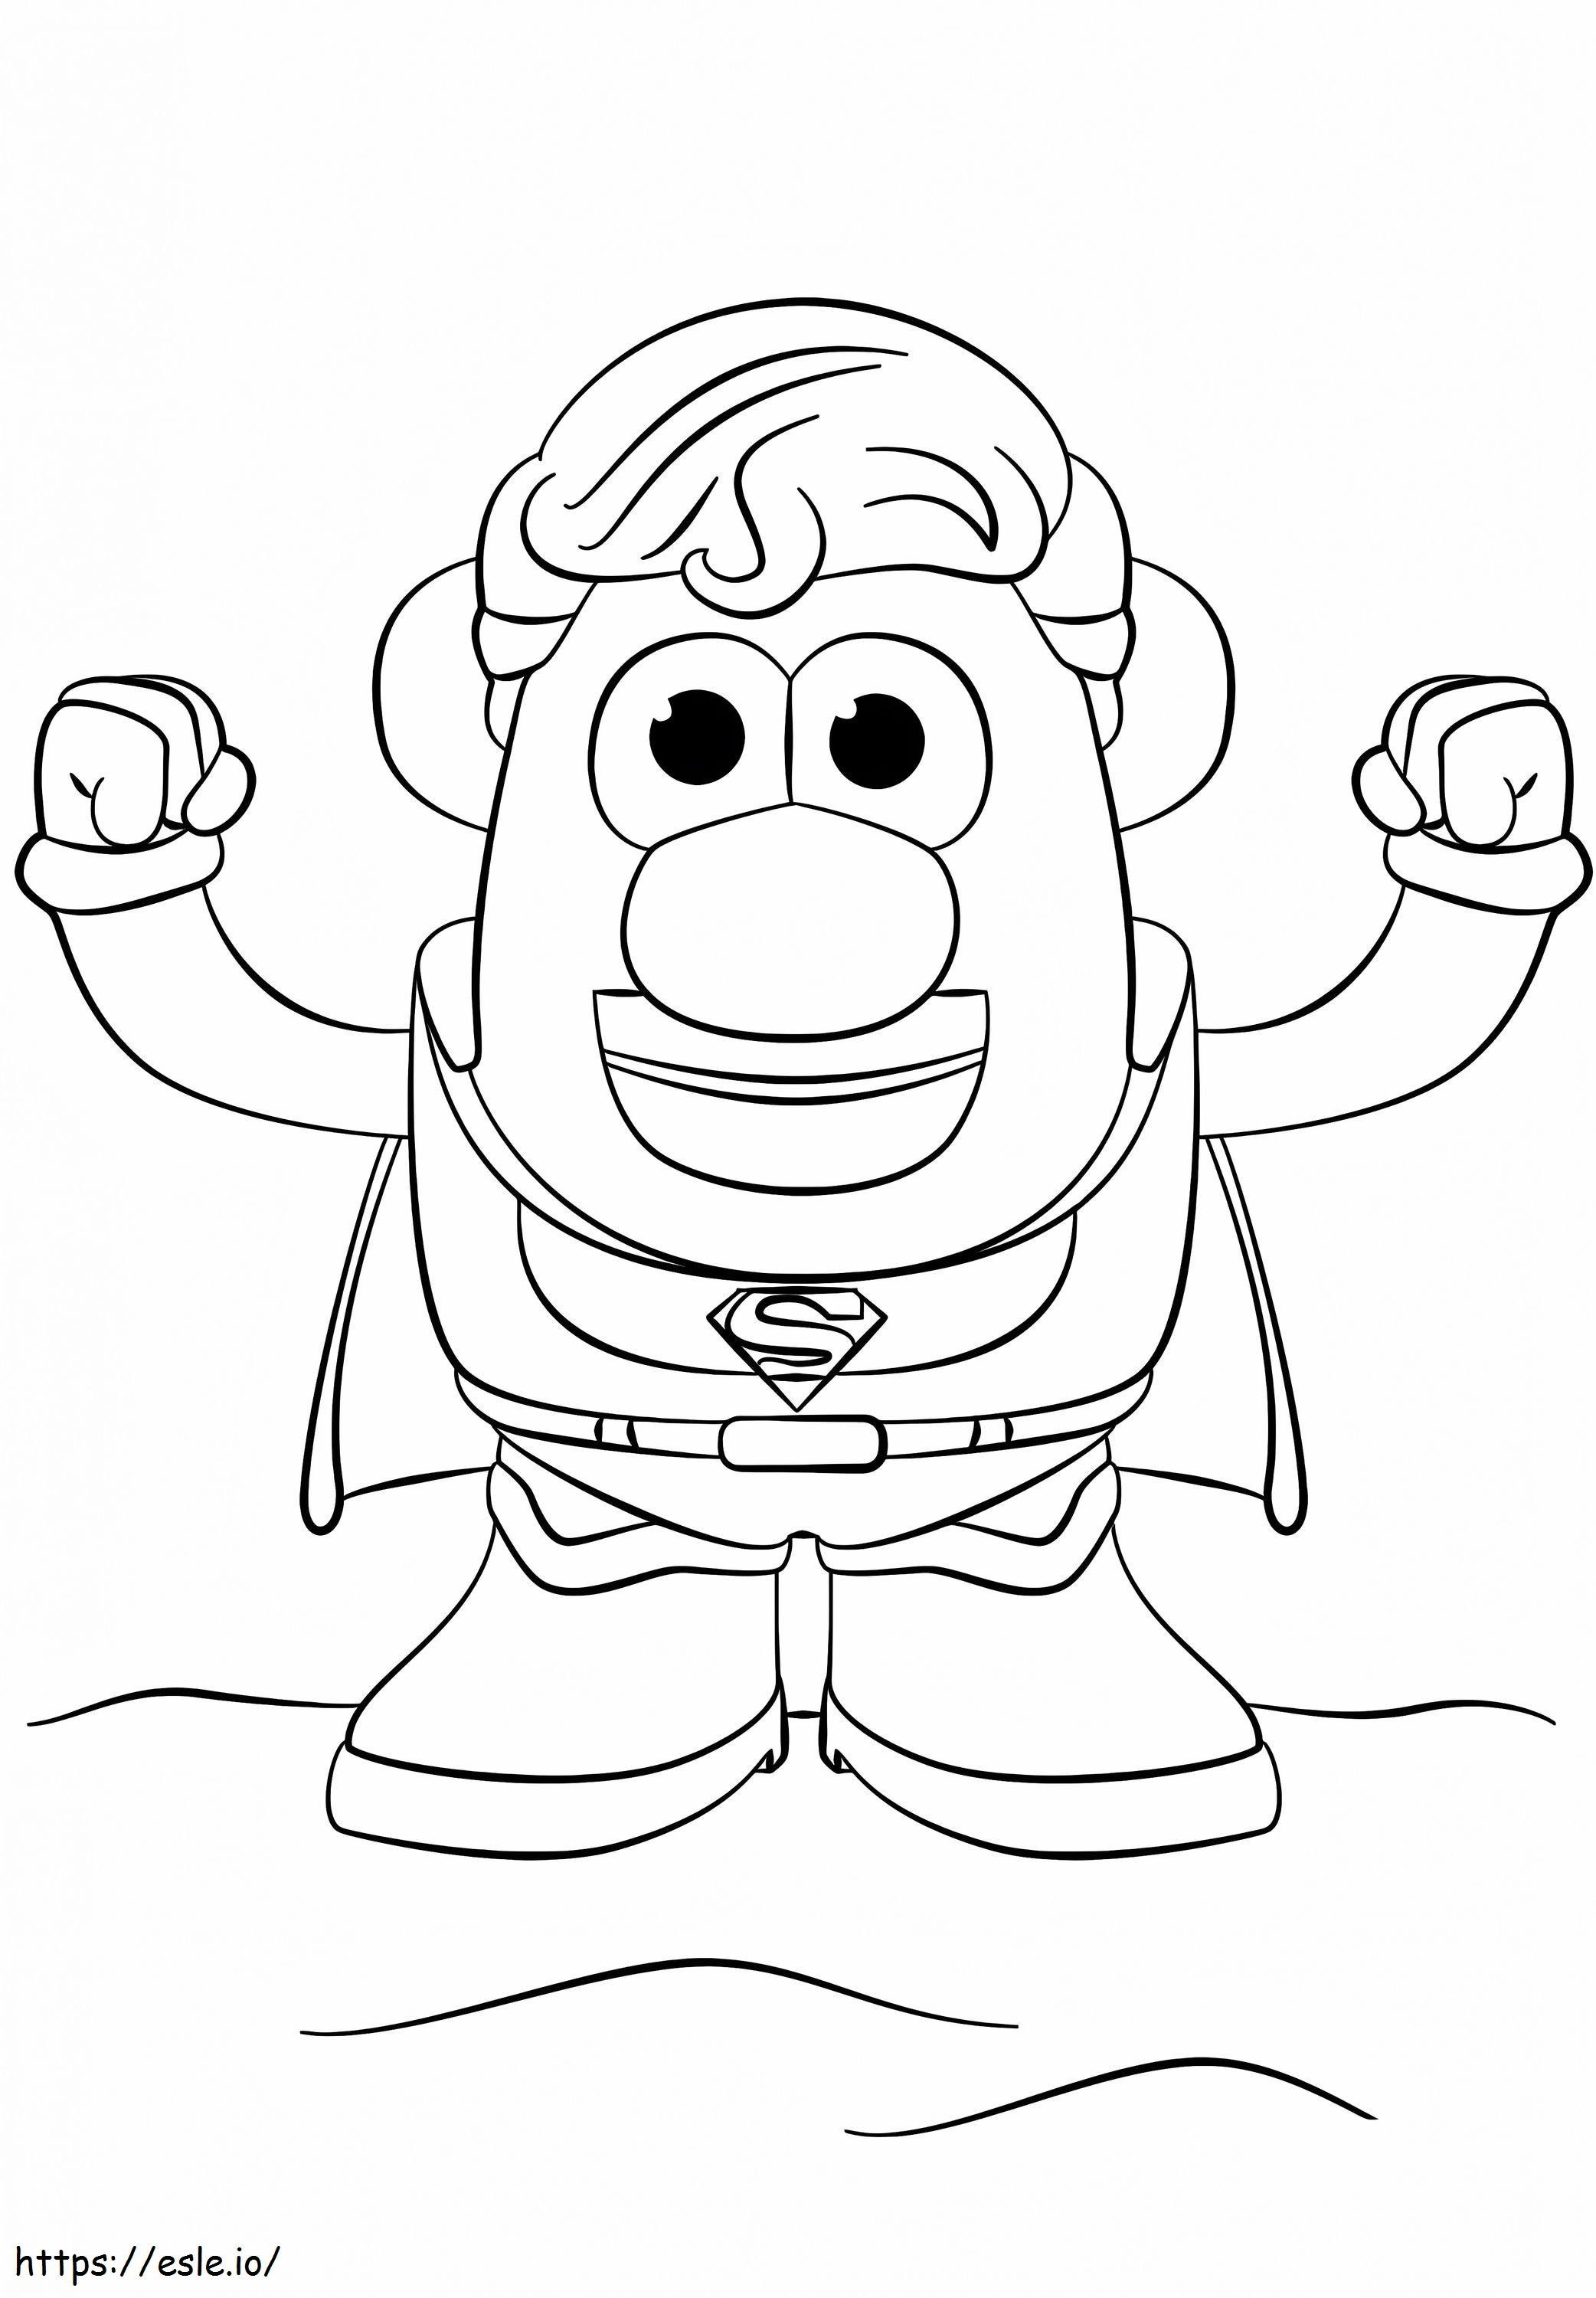 1548837797 Potato Head Superman Free Printable Pages New Mr coloring page